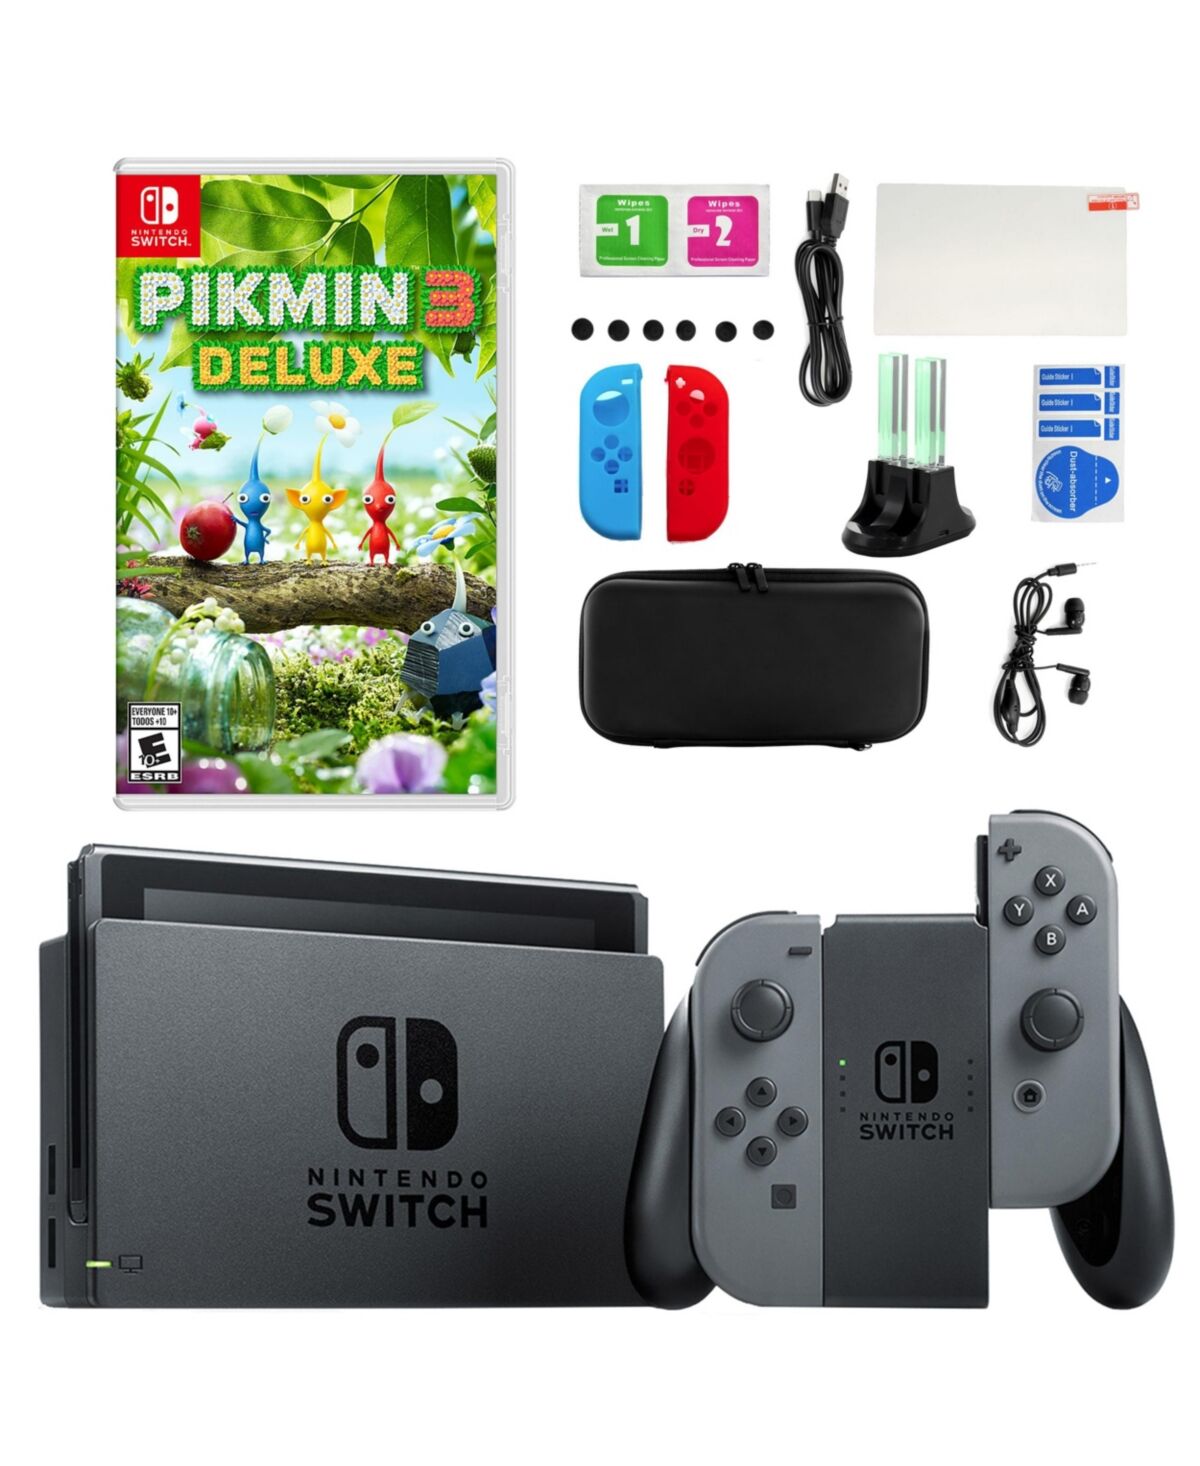 Nintendo Switch in Gray with Pikmin 3 Deluxe & Accessories - Grey